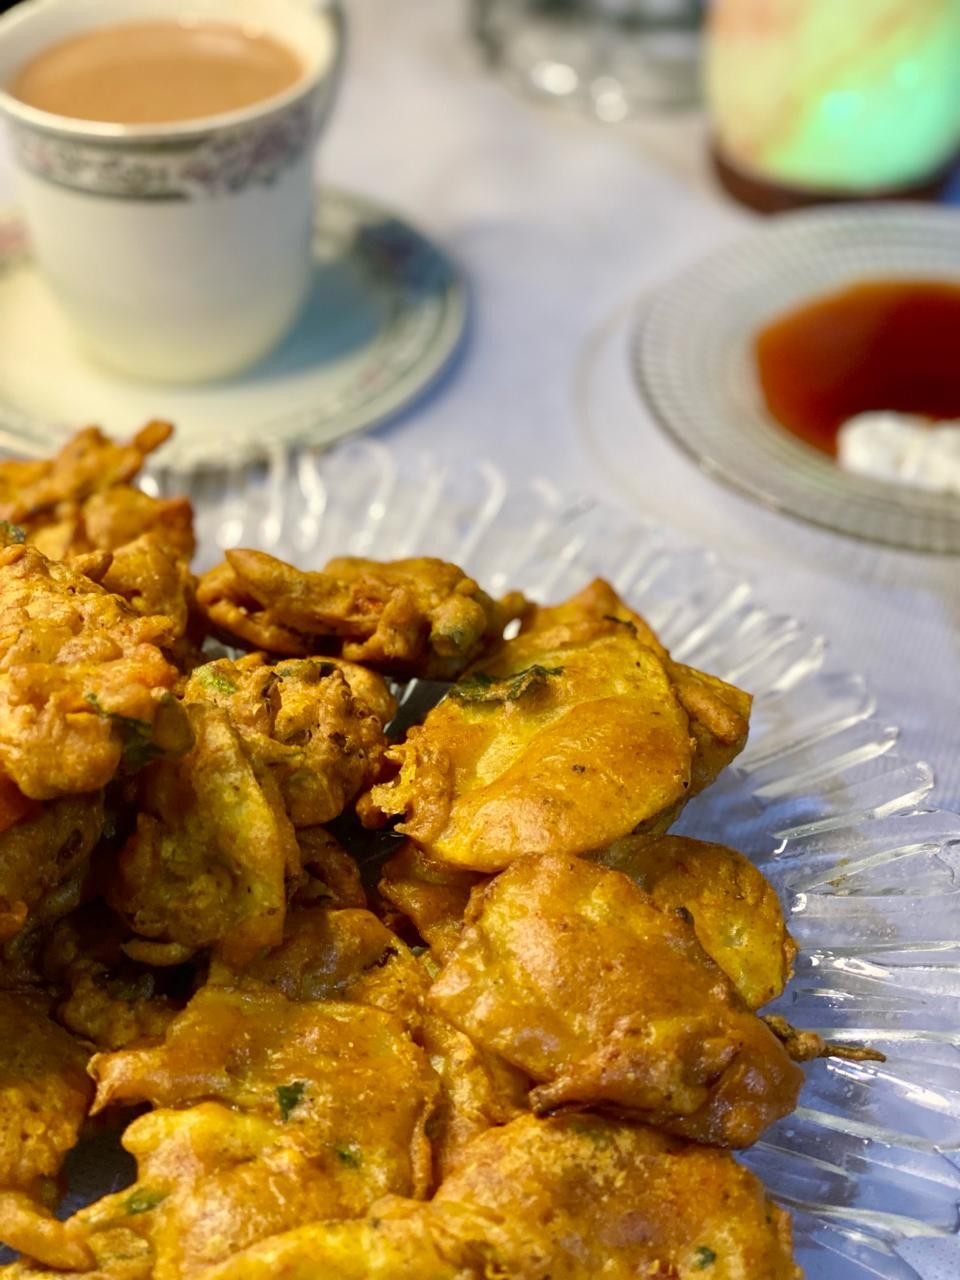 What To Serve With Pakoras?